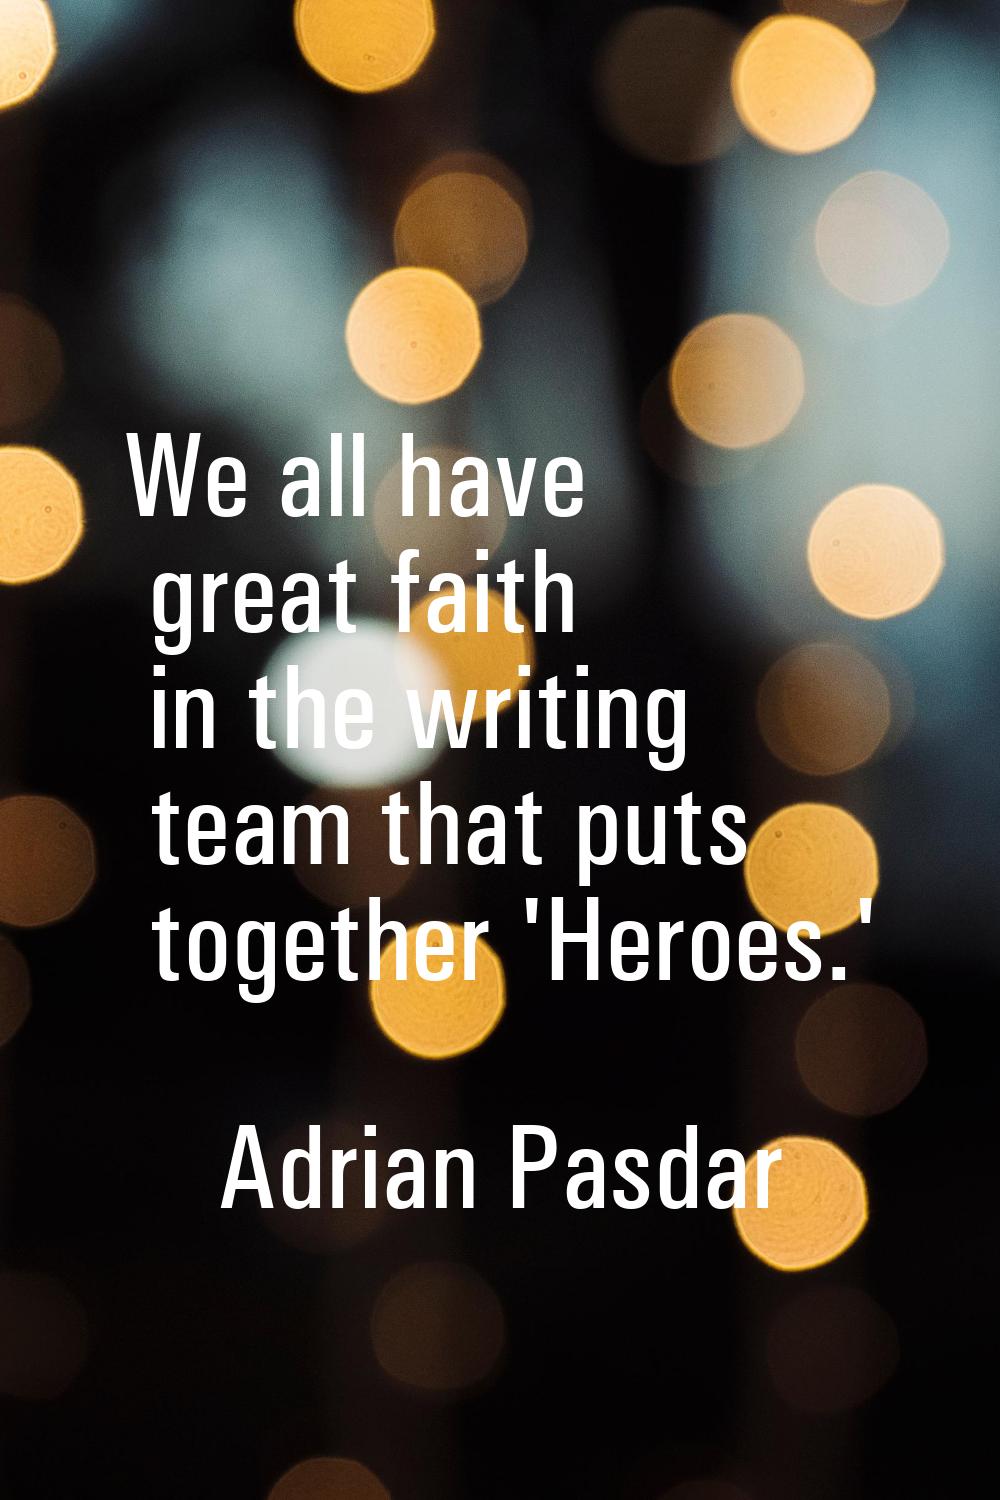 We all have great faith in the writing team that puts together 'Heroes.'